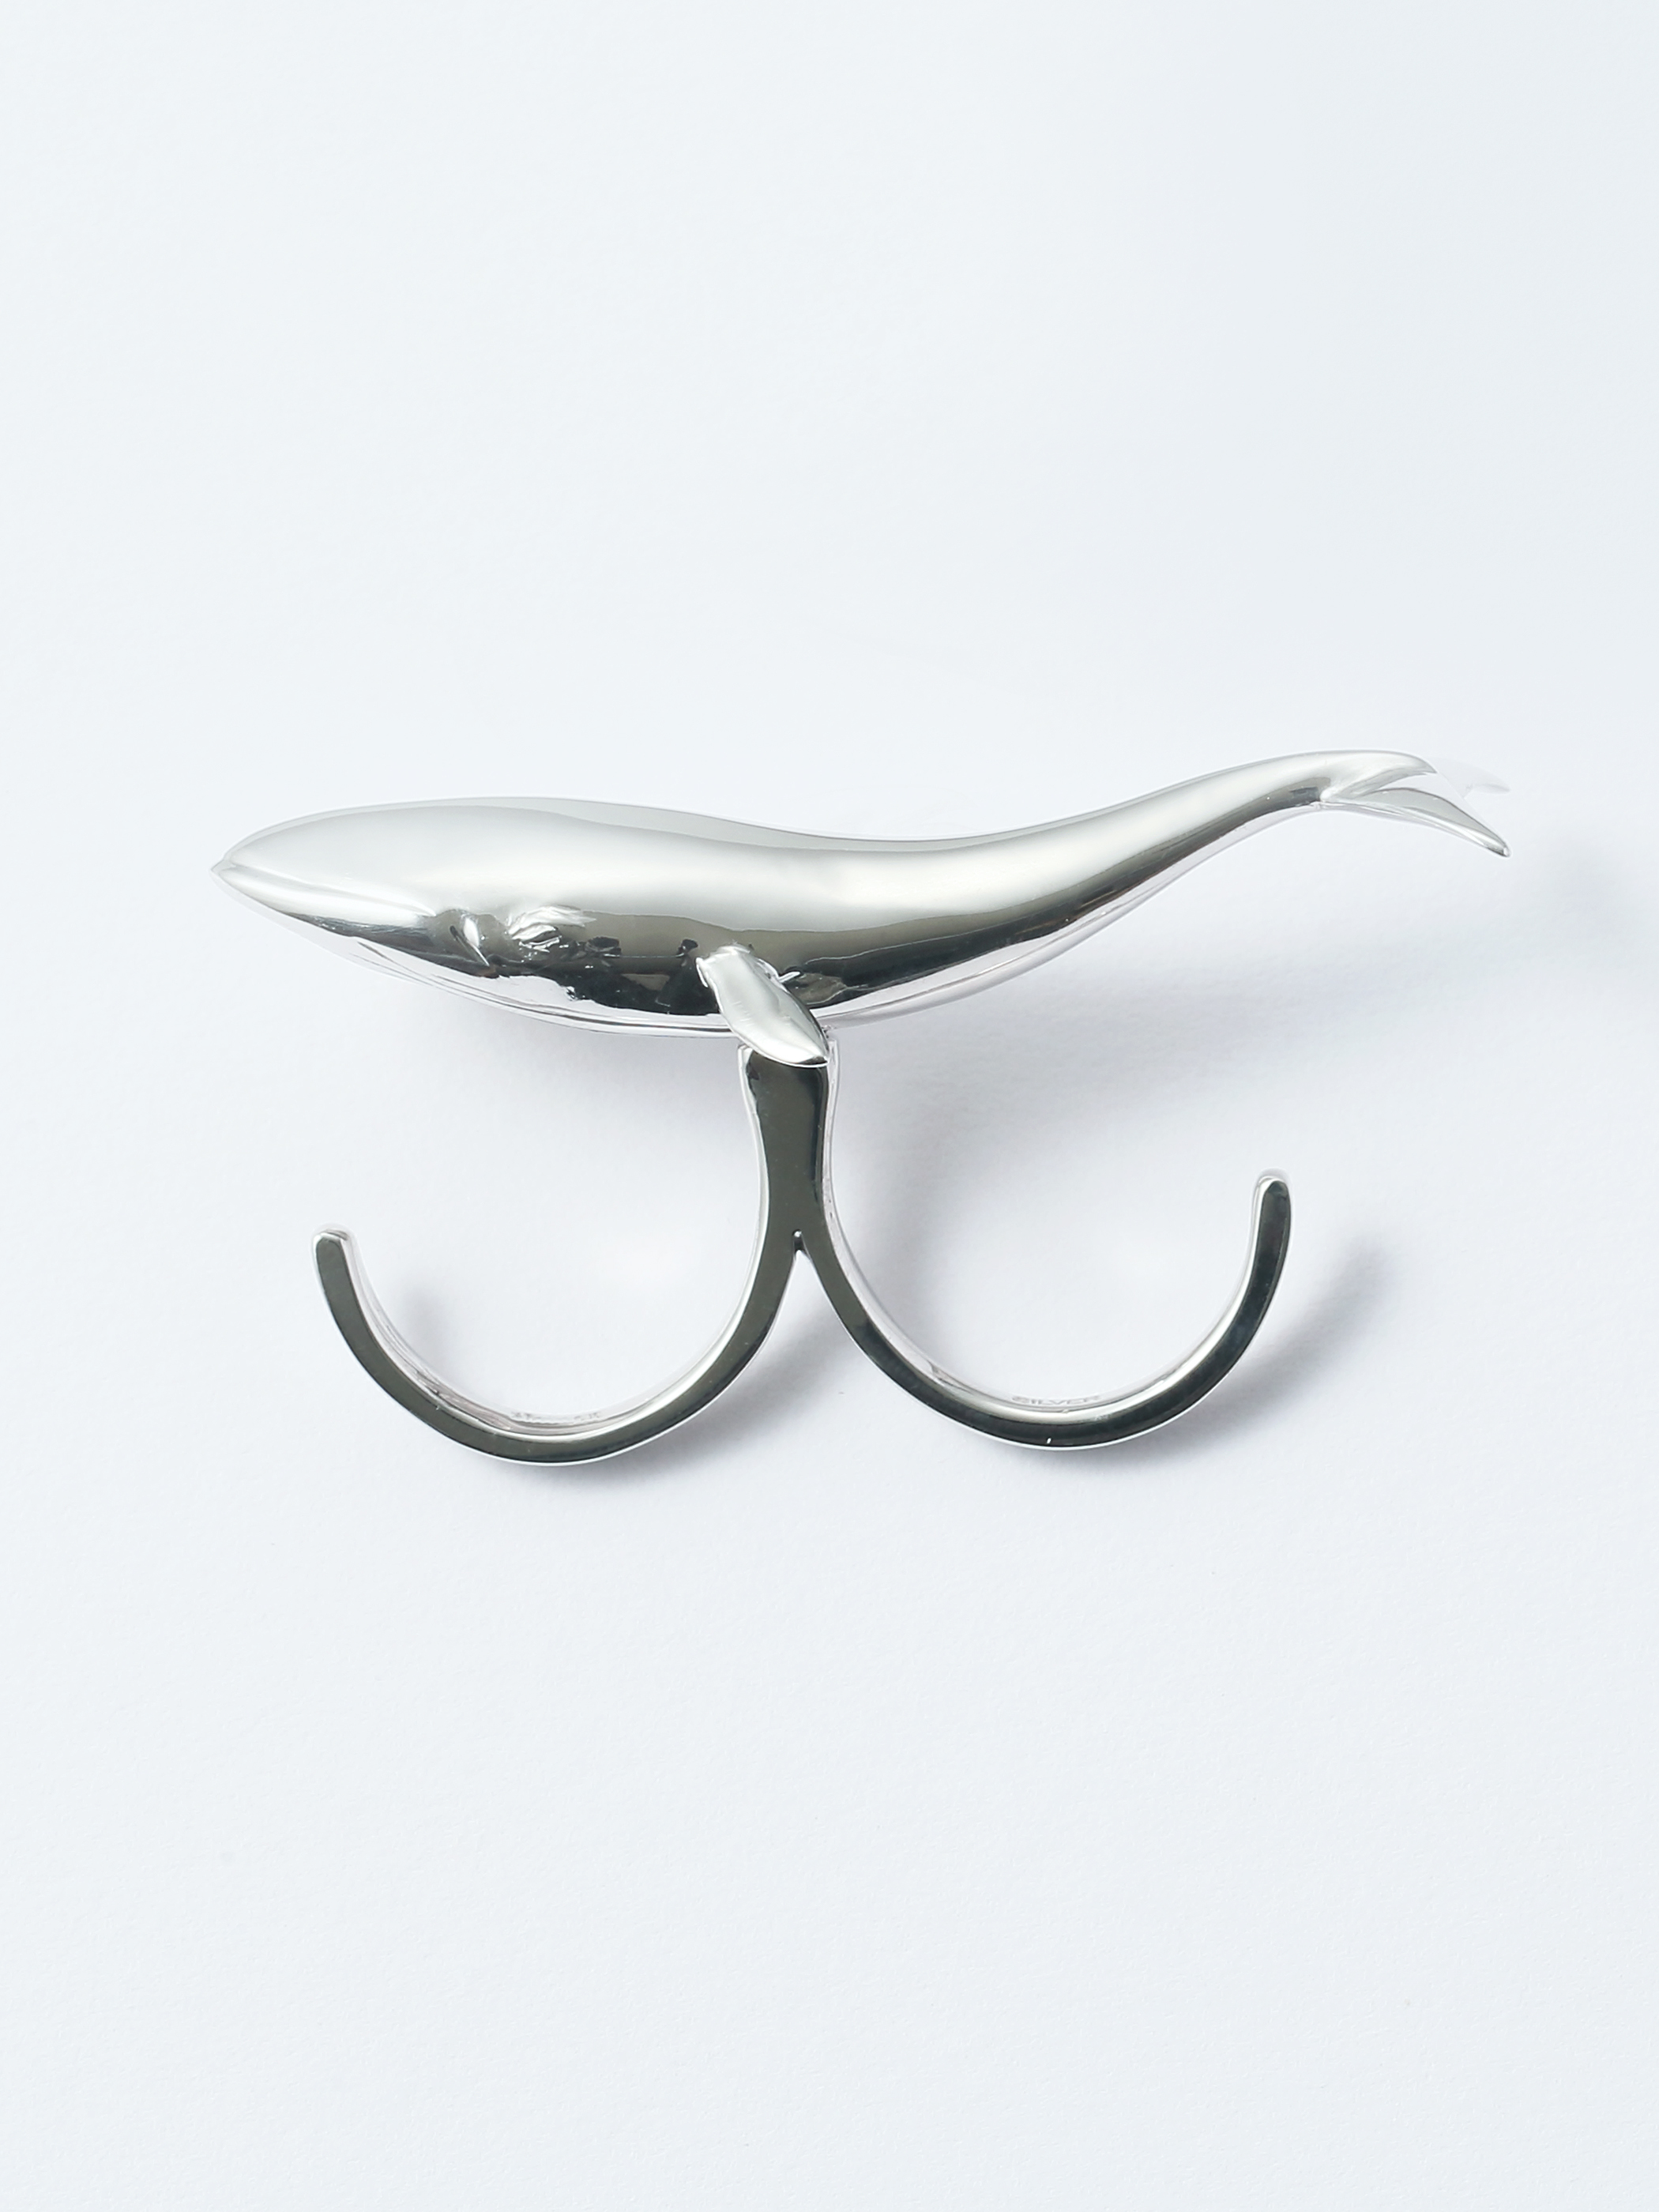 WHALE RING